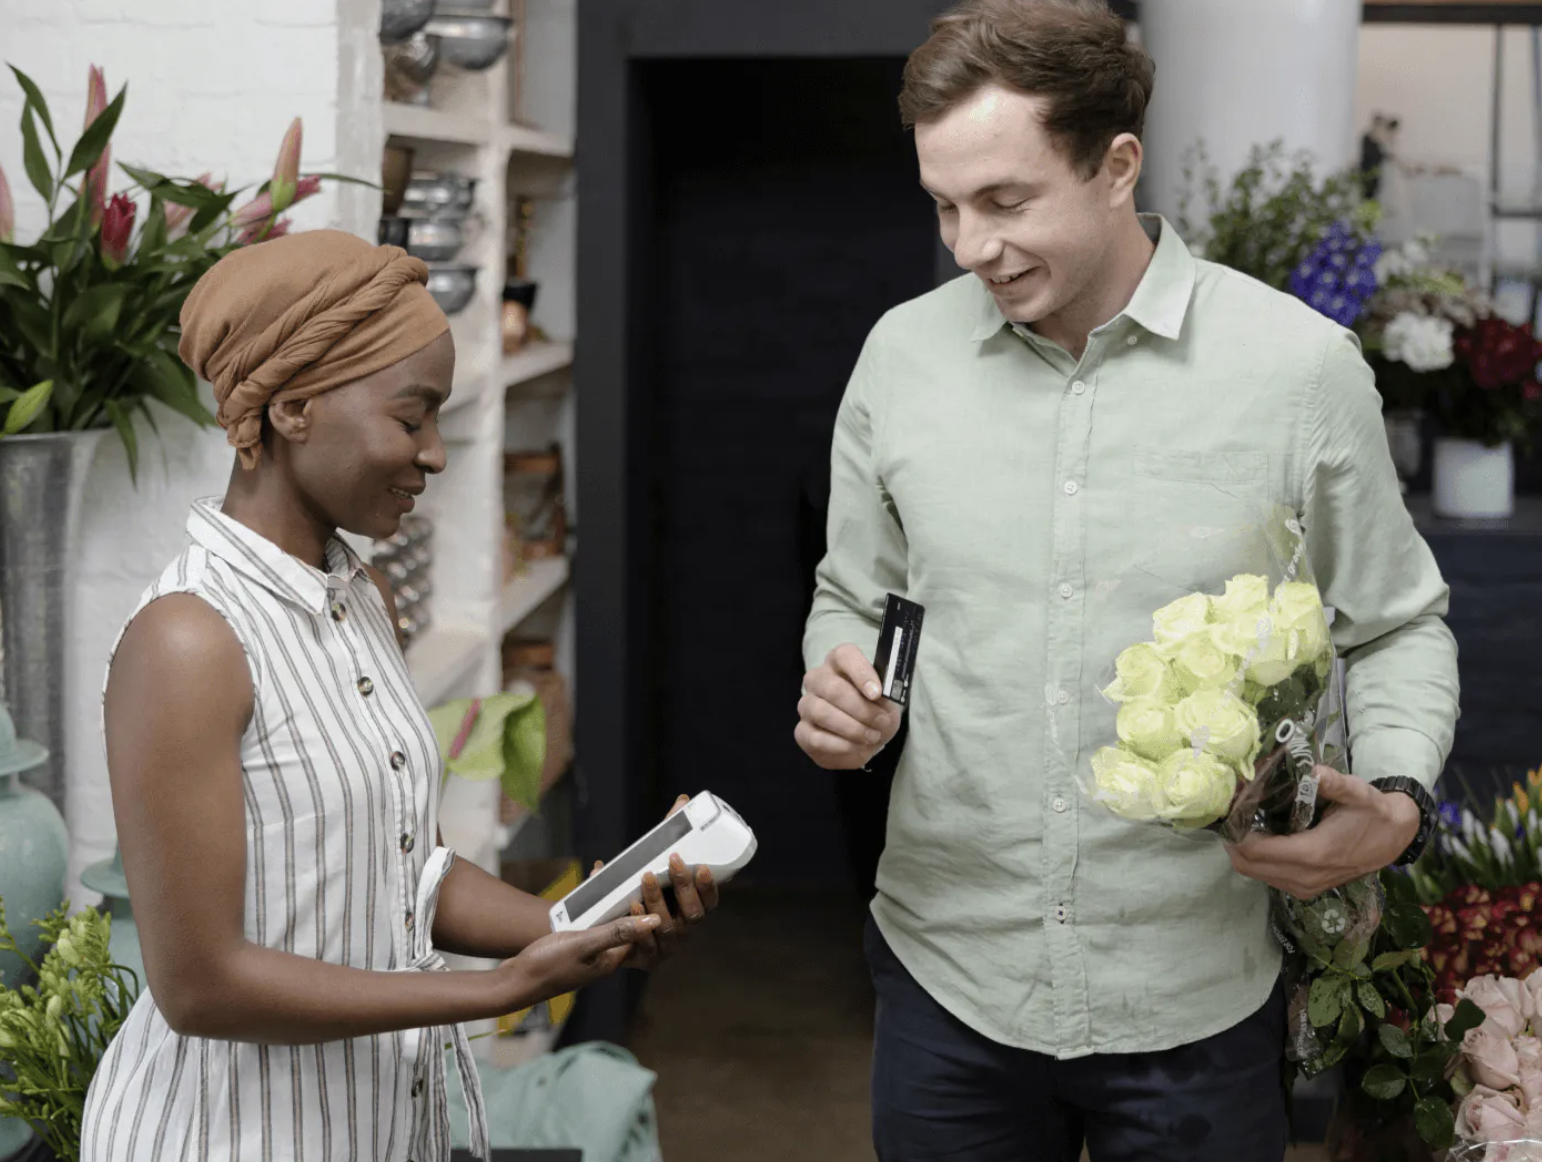 Eager customer in a retail shop purchasing flowers from a handheld mobile POS device